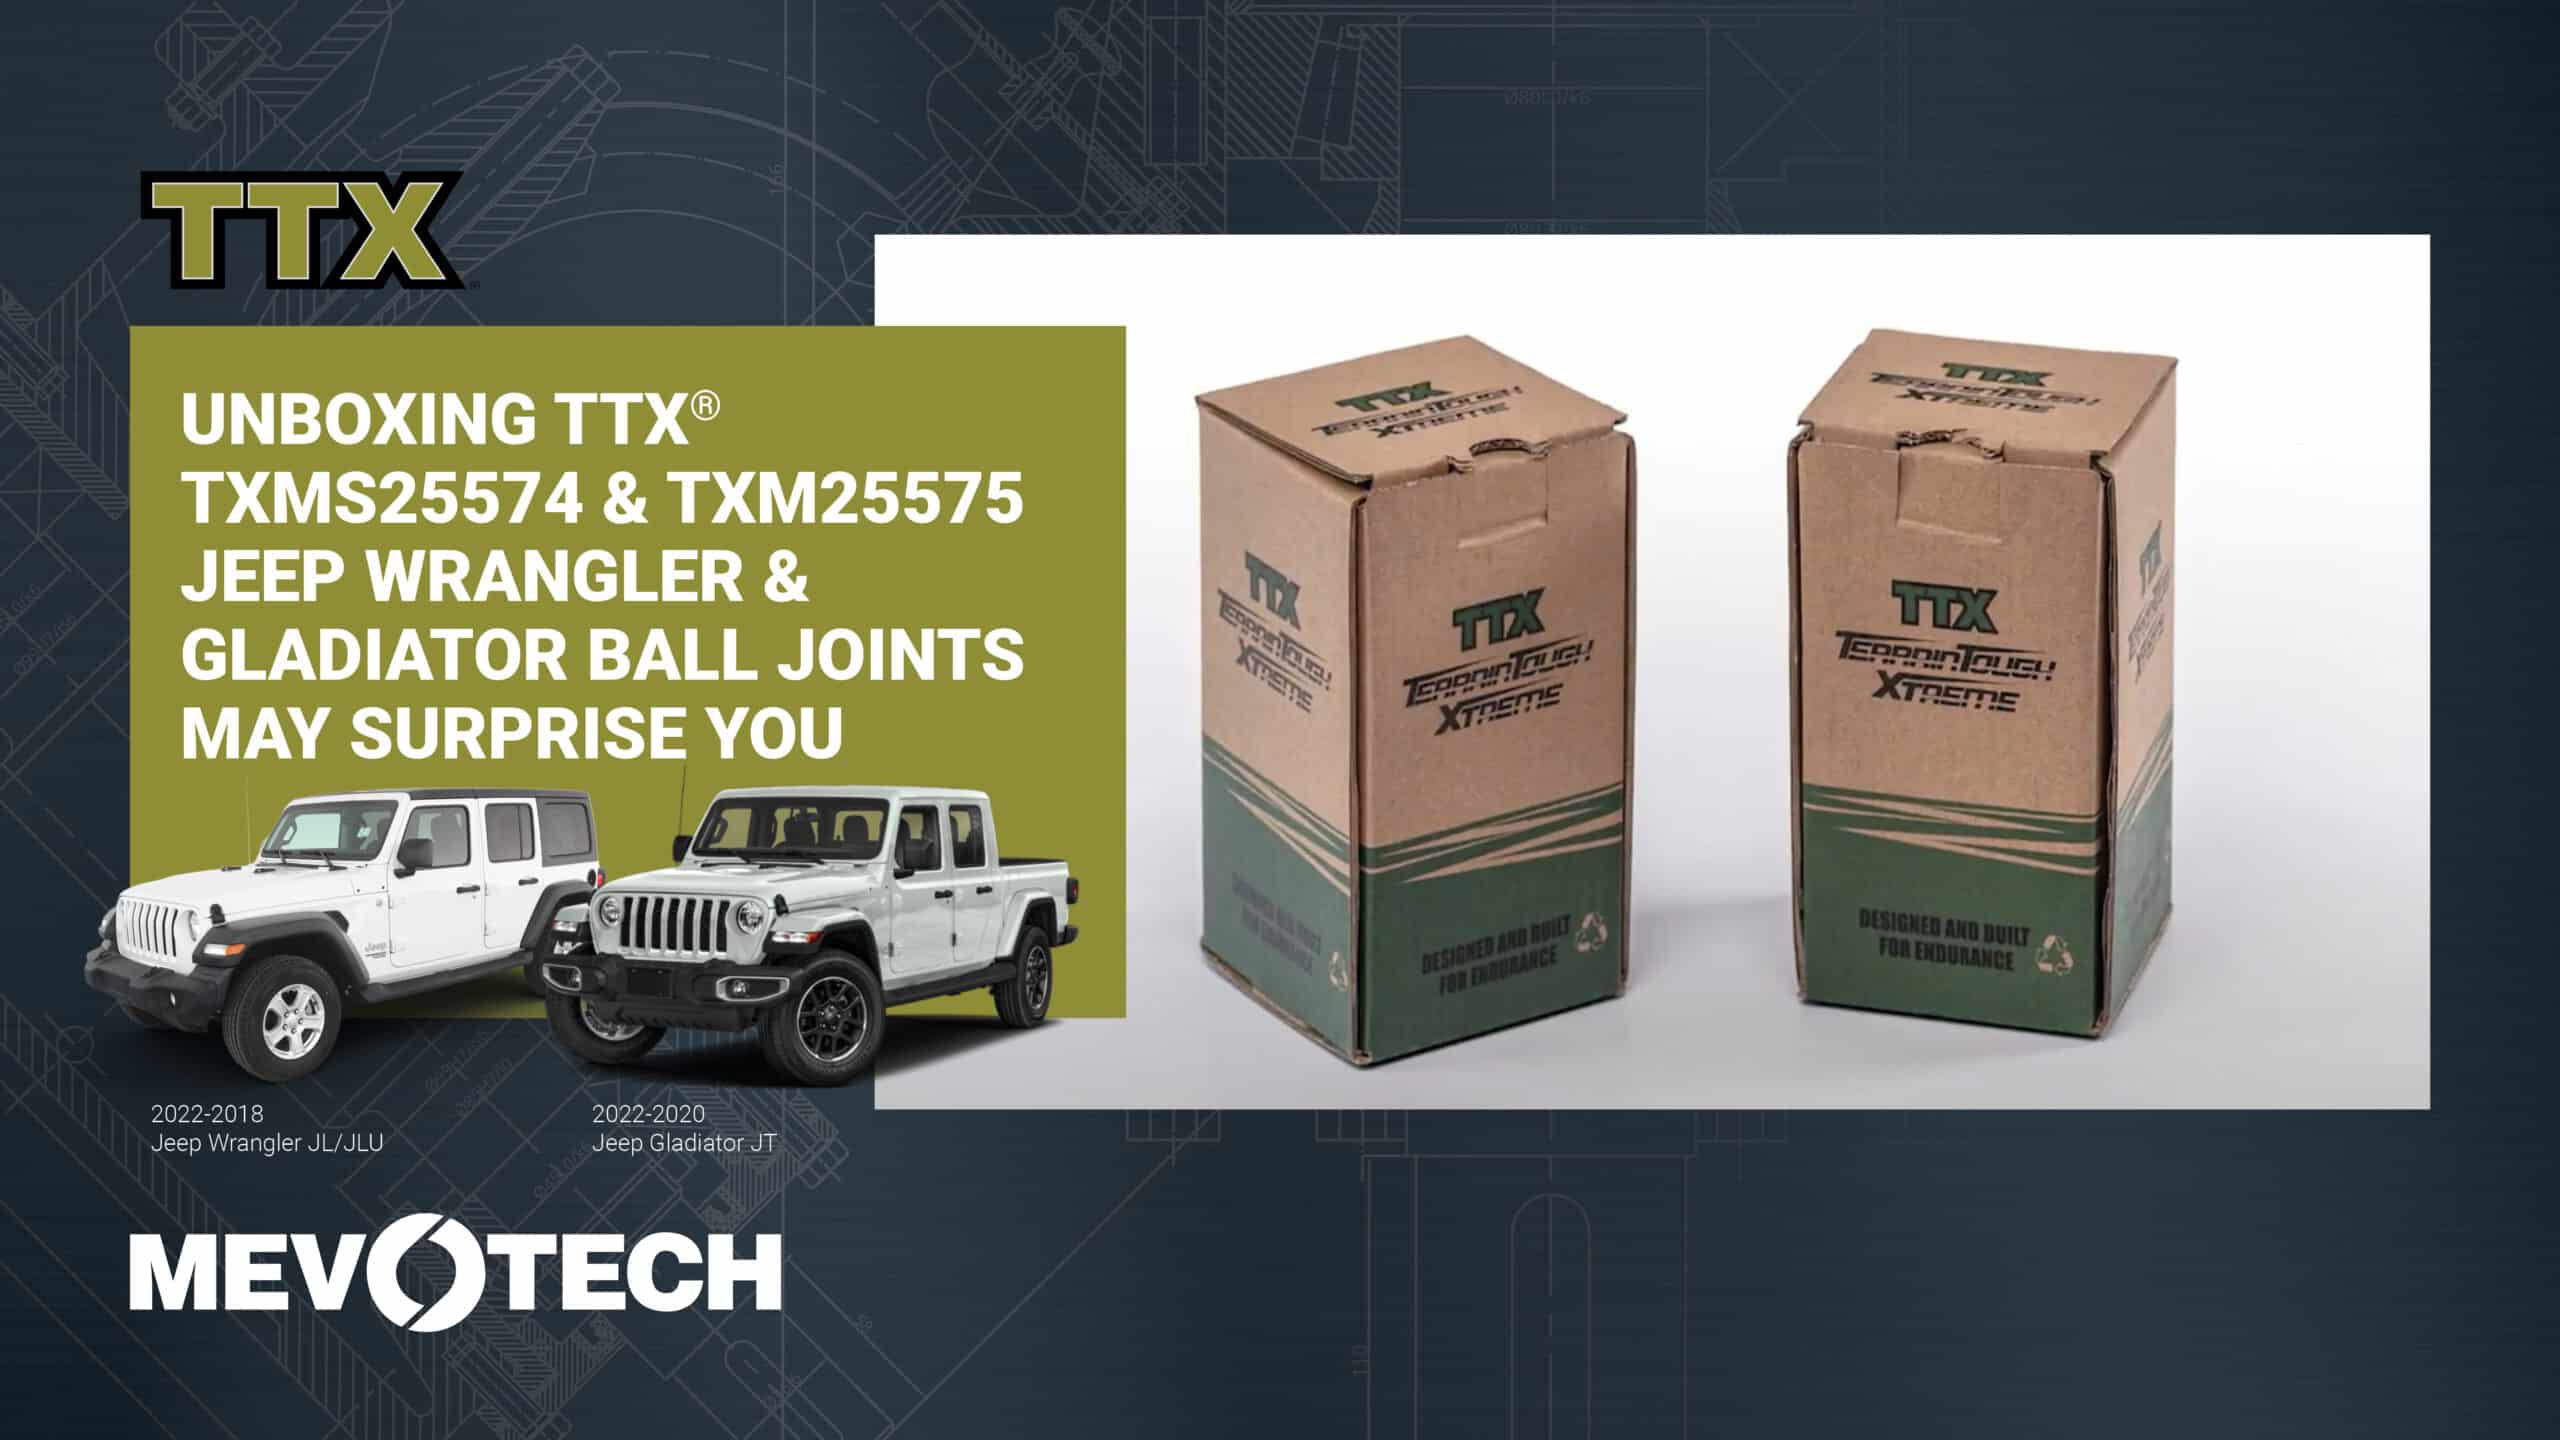 UNBOXING TTX® TXMS25574 & TXM25575 JEEP WRANGLER & GLADIATOR BALL JOINTS MAY SURPRISE YOU